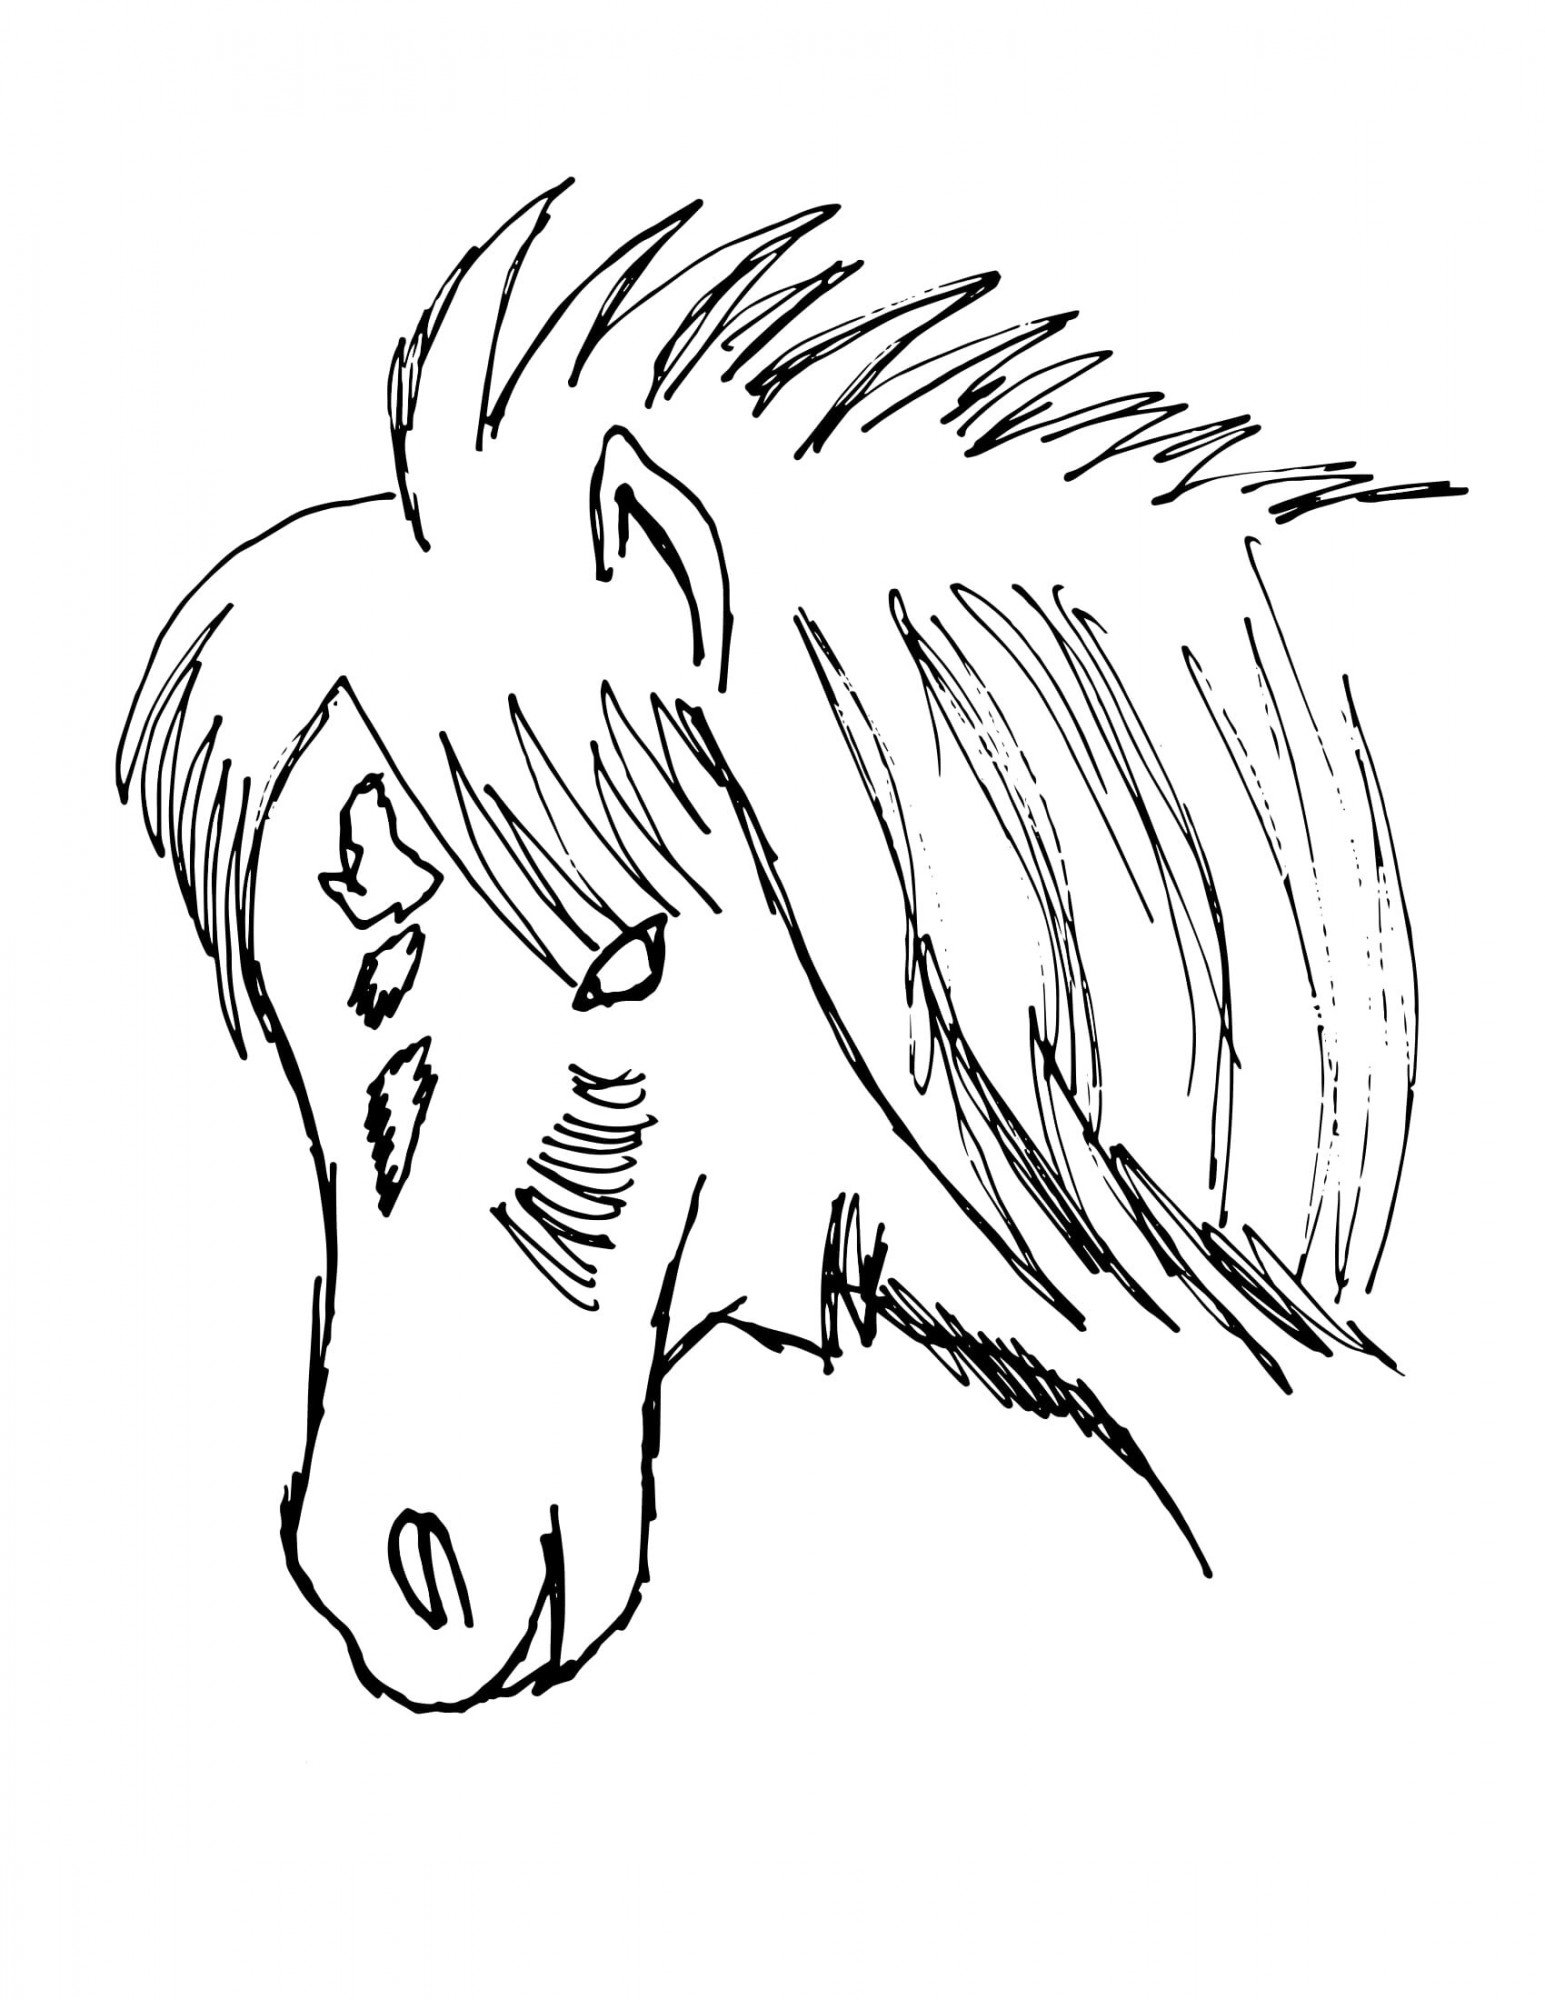 Horse "Mocha" - black and white outline for coloring